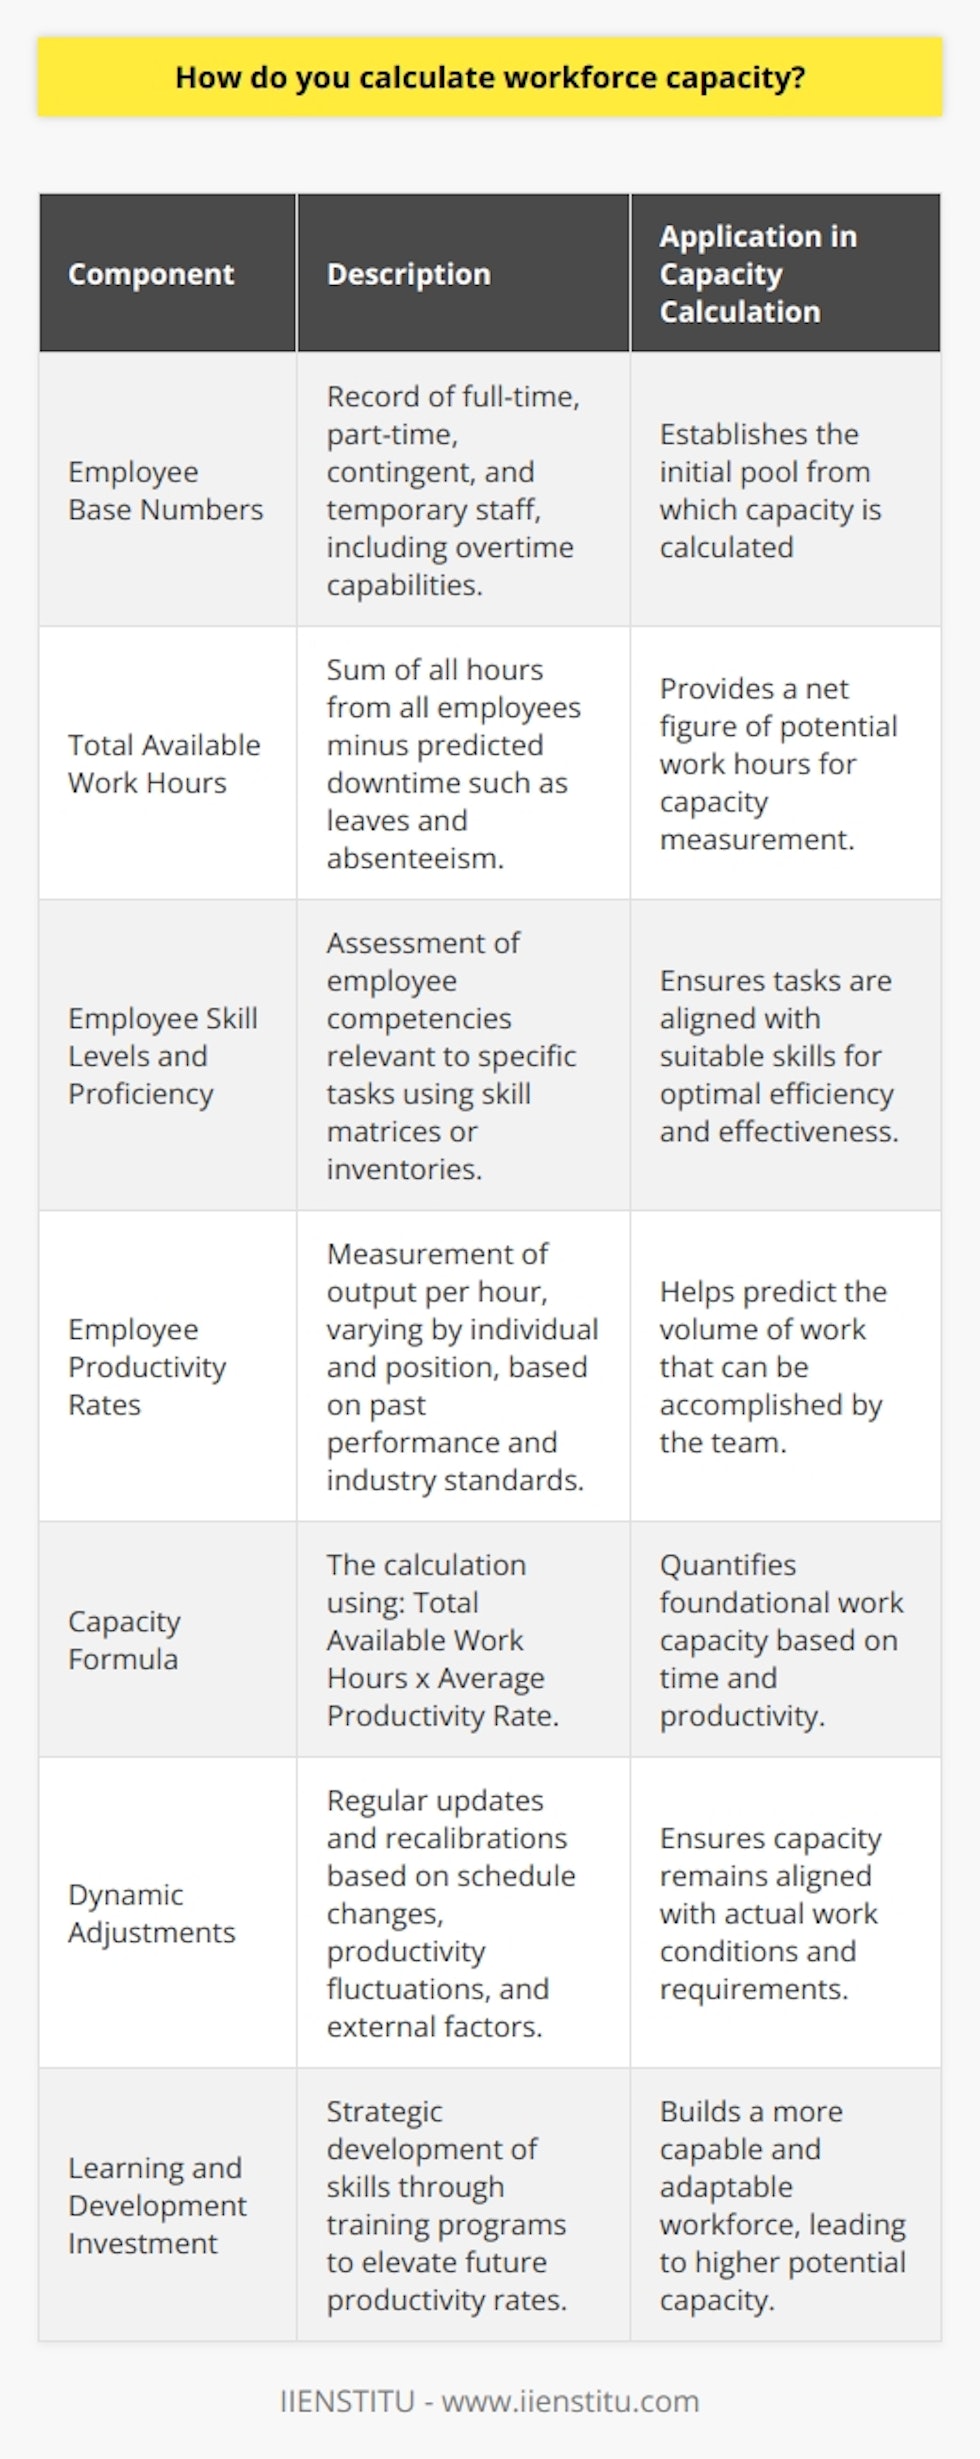 Calculating workforce capacity is a critical task for any organization aiming to optimize its productivity and manage its resources effectively. The underlying objective is to quantify how much work the workforce can accomplish in a certain period, creating a balance that maximizes efficiency without over-exerting the staff.**Establishing Employee Base Numbers**Before assessing capacity, a business must have clear records of its employee base. This includes not only full-time staff but also part-time, contingent, temporary staff, and any possibilities for overtime. Such information frames the foundation of the workforce capacity equation.**Total Available Work Hours**Central to calculating capacity is the factor of total available work hours. This entails an aggregate sum of all hours available from all employees for the specified time frame. You subtract any predicted downtime, such as scheduled leaves or historically noted absenteeism, from this total to yield a net availability figure.**Incorporating Skill Levels and Proficiency**Understanding which employees are best suited for particular tasks is essential for enhancing capacity. Skill matrices or inventories can provide insights into which staff members have the necessary competencies for specific work requirements. By aligning tasks with the right skill levels, organizations ensure that work is carried out more efficiently and effectively.**Employee Productivity Rates**An accurate picture of productivity rates is imperative. Referred to as the 'output per hour', productivity rates vary by individual and position. They can be determined through various means including past performance metrics and industry standards. A nuanced understanding of this variable enables managers to more precisely forecast how much work their teams can complete.**The Capacity Formula**Bringing these elements together, workforce capacity can be quantified using the following basic formulation:Workforce Capacity = Total Available Work Hours x Average Productivity RateThis formula provides a foundational assessment of how much work can be executed, drawing directly on the available time and how efficiently workers can apply their labor within that time.**Dynamic Adjustments for Real-World Scenarios**Capacity planning isn't a 'set and forget' process. Regular updates to workforce schedules, fluctuating productivity rates, and other variables such as project scope creep or emergent tasks necessitate frequent recalibrations of capacity. Organizations that stay attuned to these changes and adapt accordingly are better positioned to handle abrupt shifts in demand or resource capability.**Learning and Development Investment**Additionally, a forward-looking approach to workforce capacity can include the strategic development of employee skills to enhance future productivity rates. Through informed investments in training and learning initiatives, such as those available at IIENSTITU, organizations can nurture a more capable and flexible workforce.In the pursuit of insightful capacity planning, it's evident that there is no one-size-fits-all solution. Instead, it requires a tailored approach that accounts for the unique rhythms and needs of each business. When calculated and managed attentively, workforce capacity becomes an invaluable metric guiding companies to not only meet their productivity goals but surpass them.